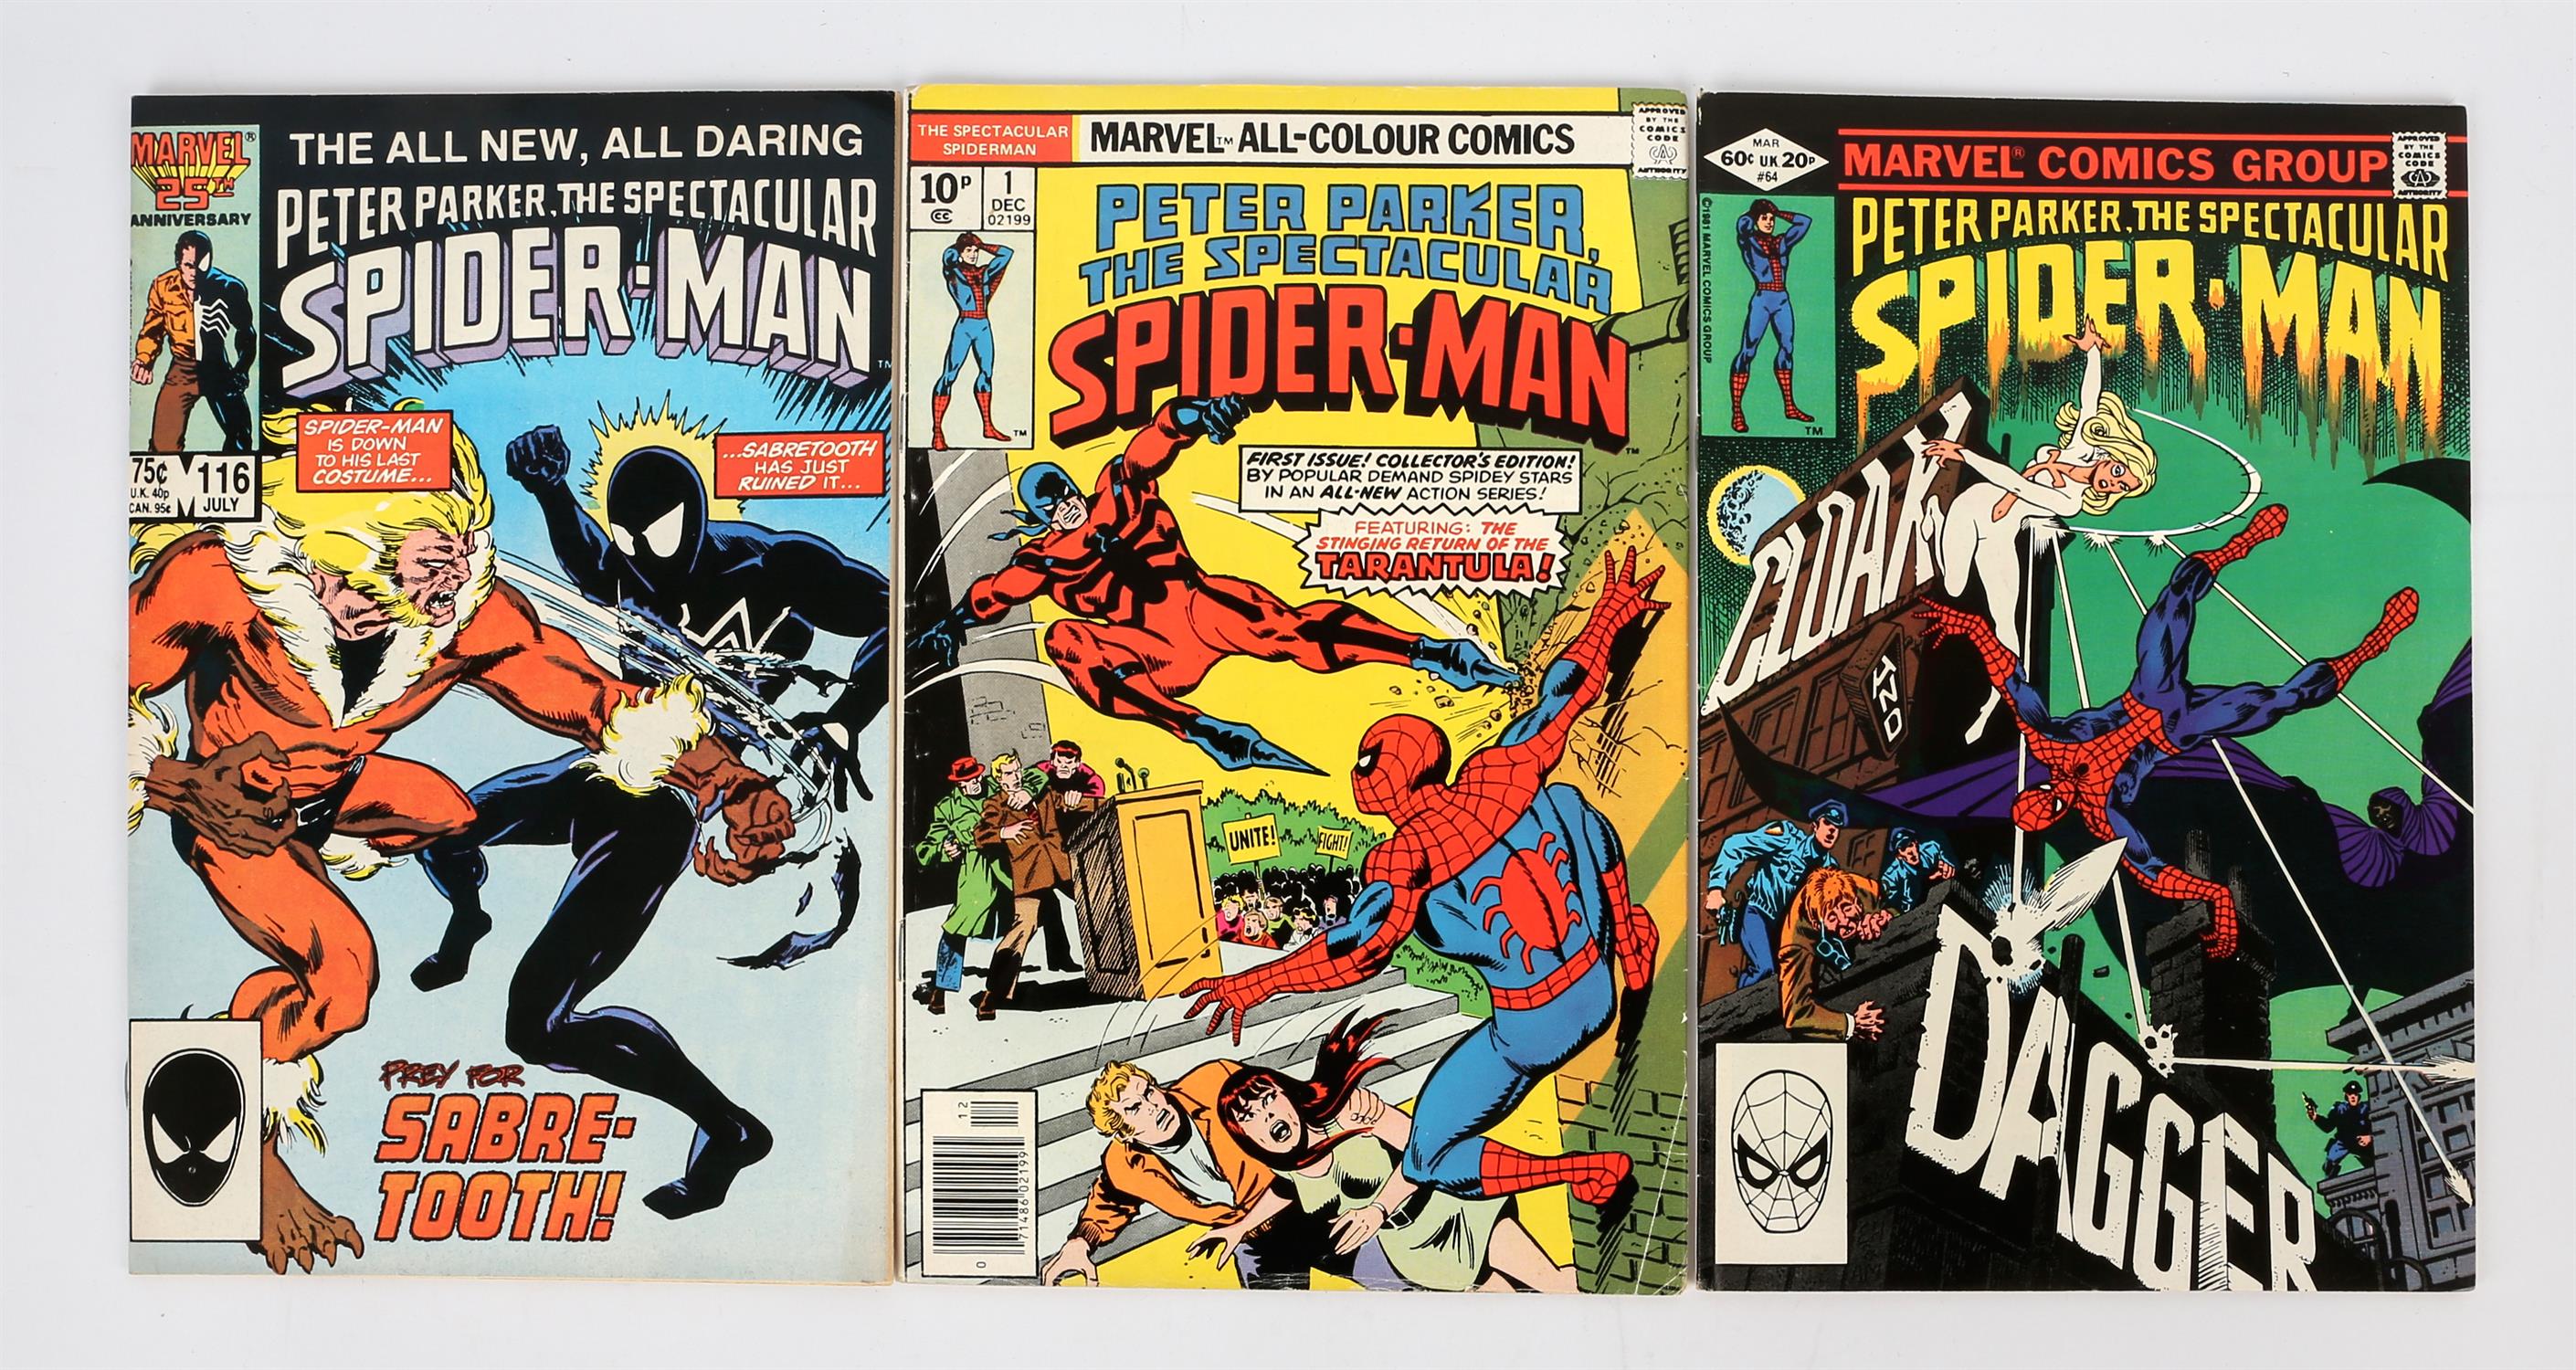 Marvel Comics: 3 Peter Parker: The Spectacular Spider-Man key issues (1982). This lot